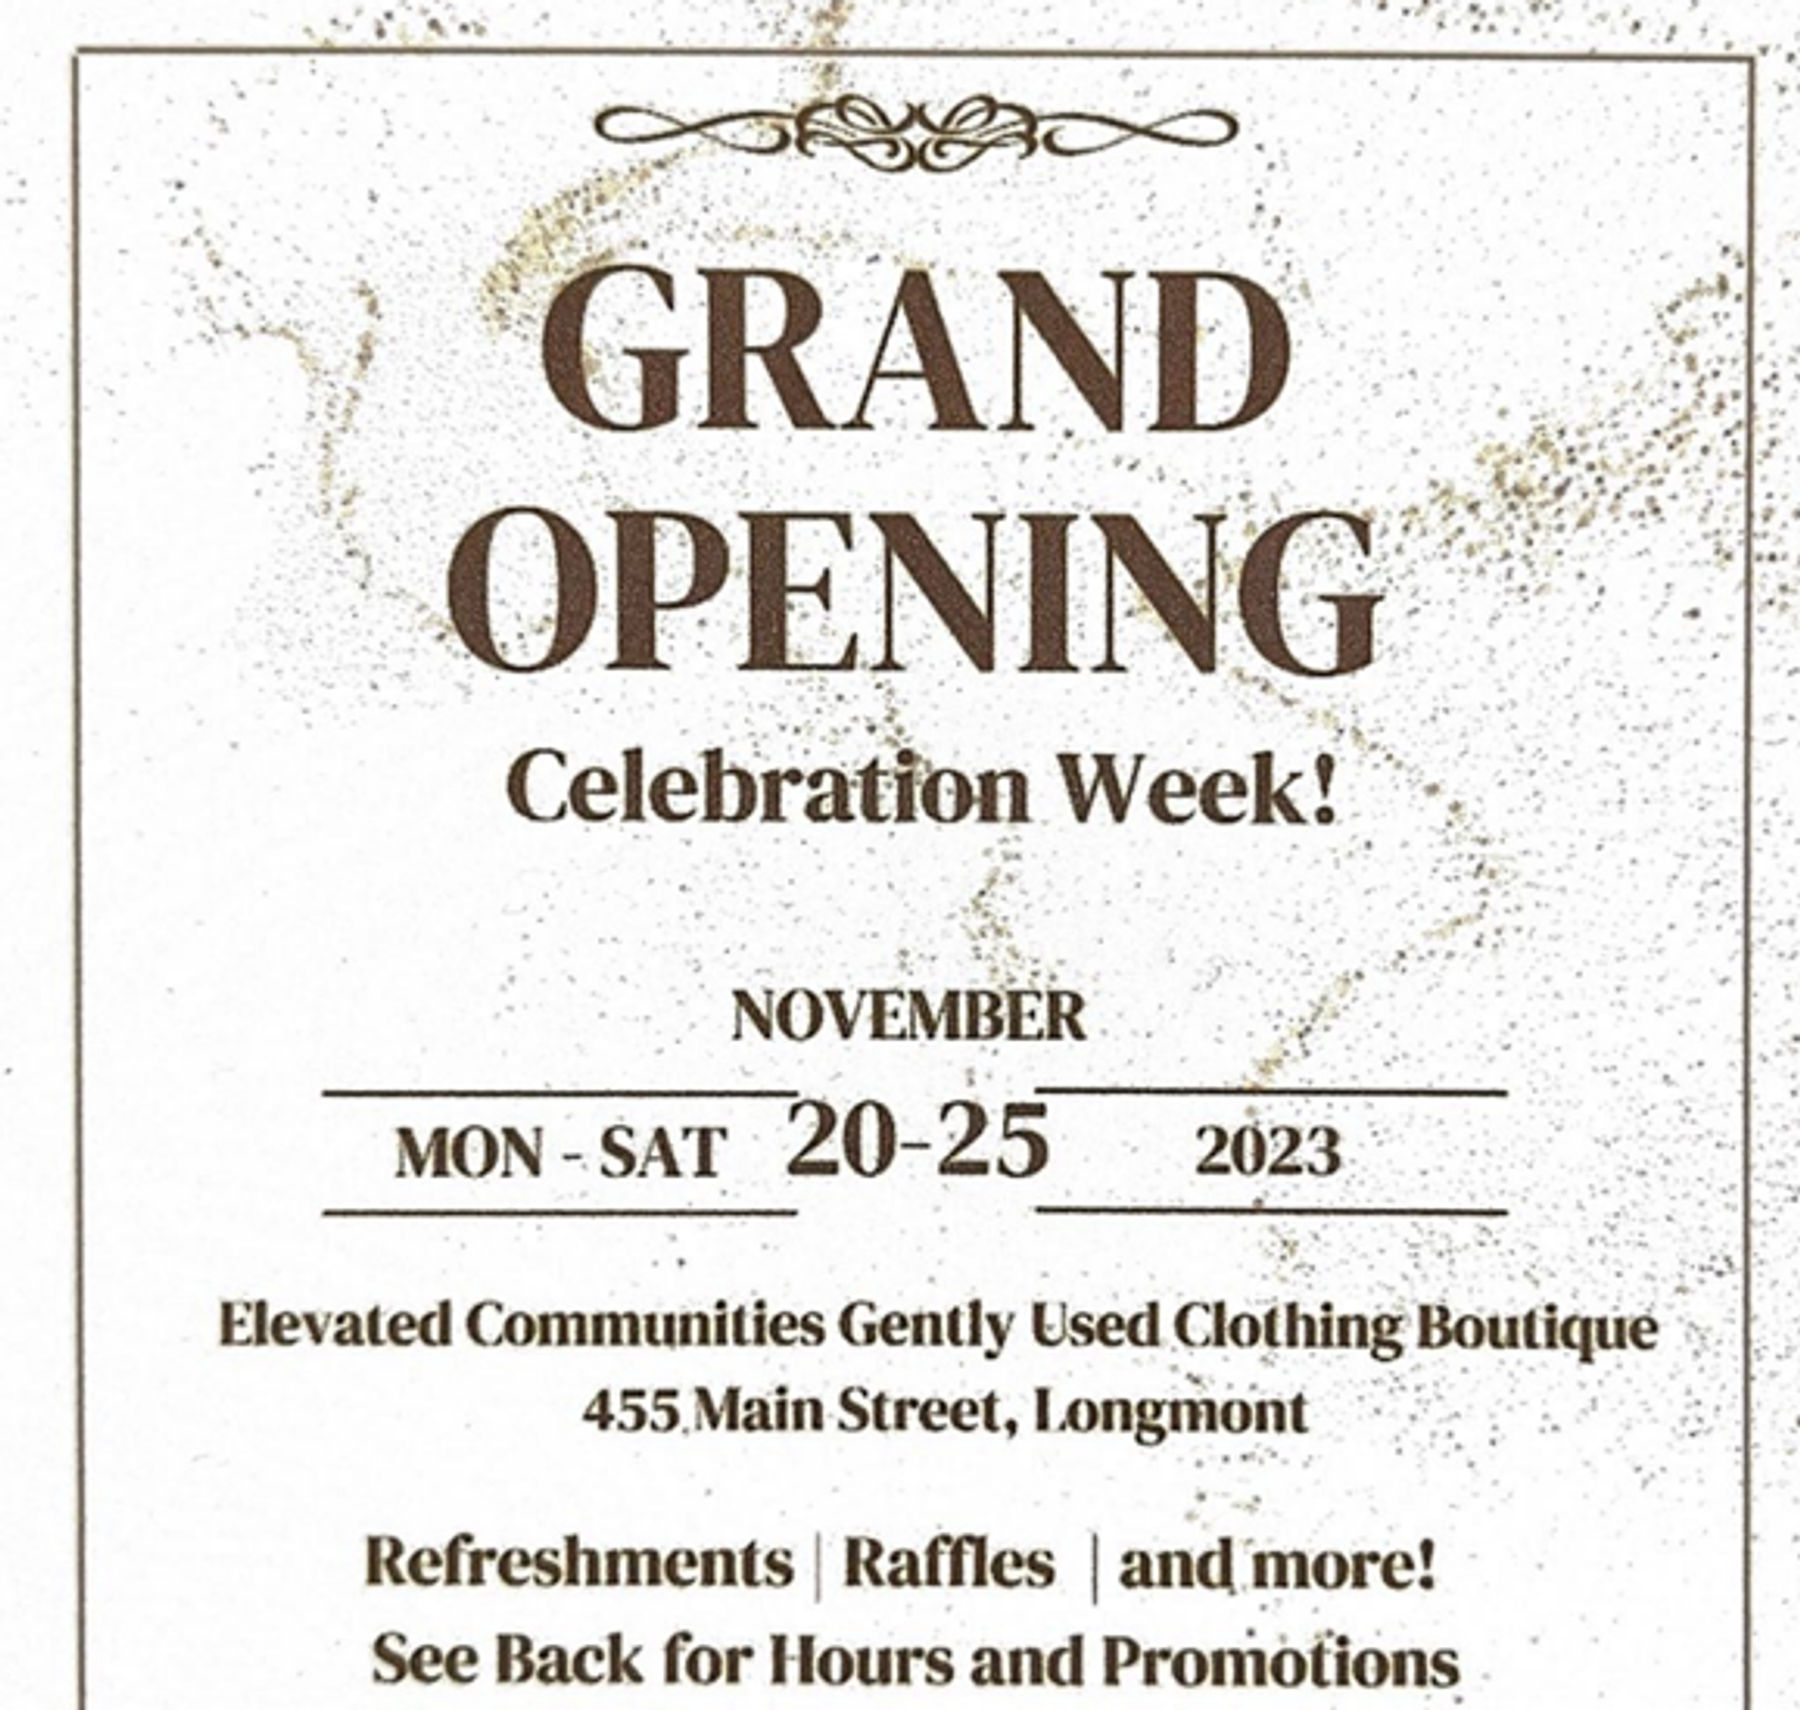 Elevated Communities Gently Used Clothing Boutique Grand Opening